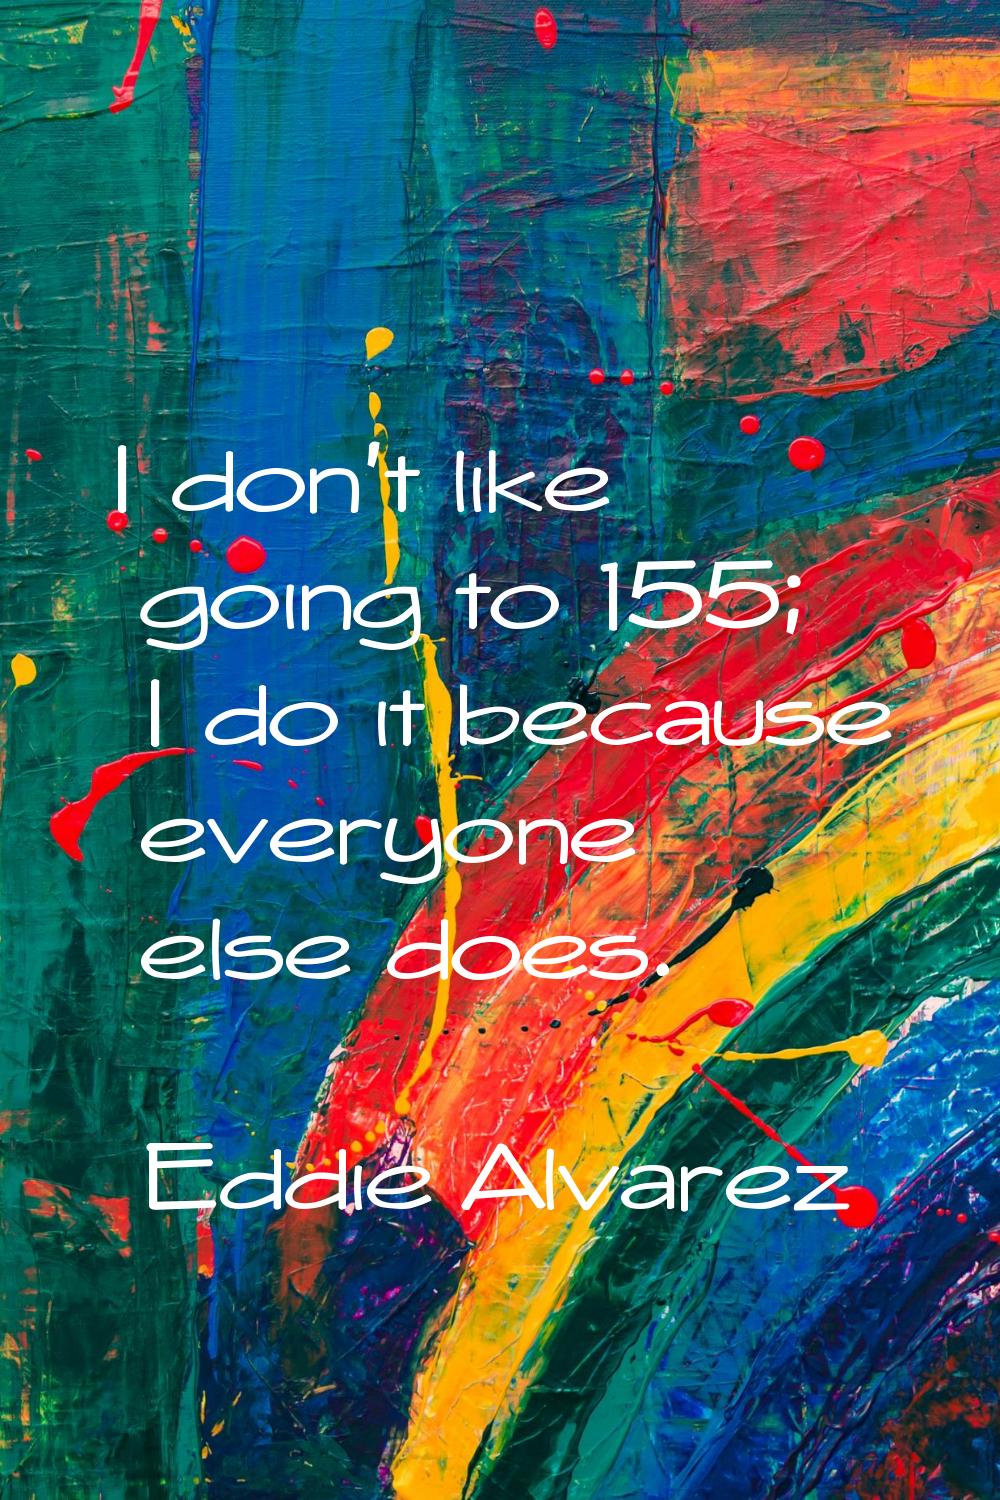 I don't like going to 155; I do it because everyone else does.